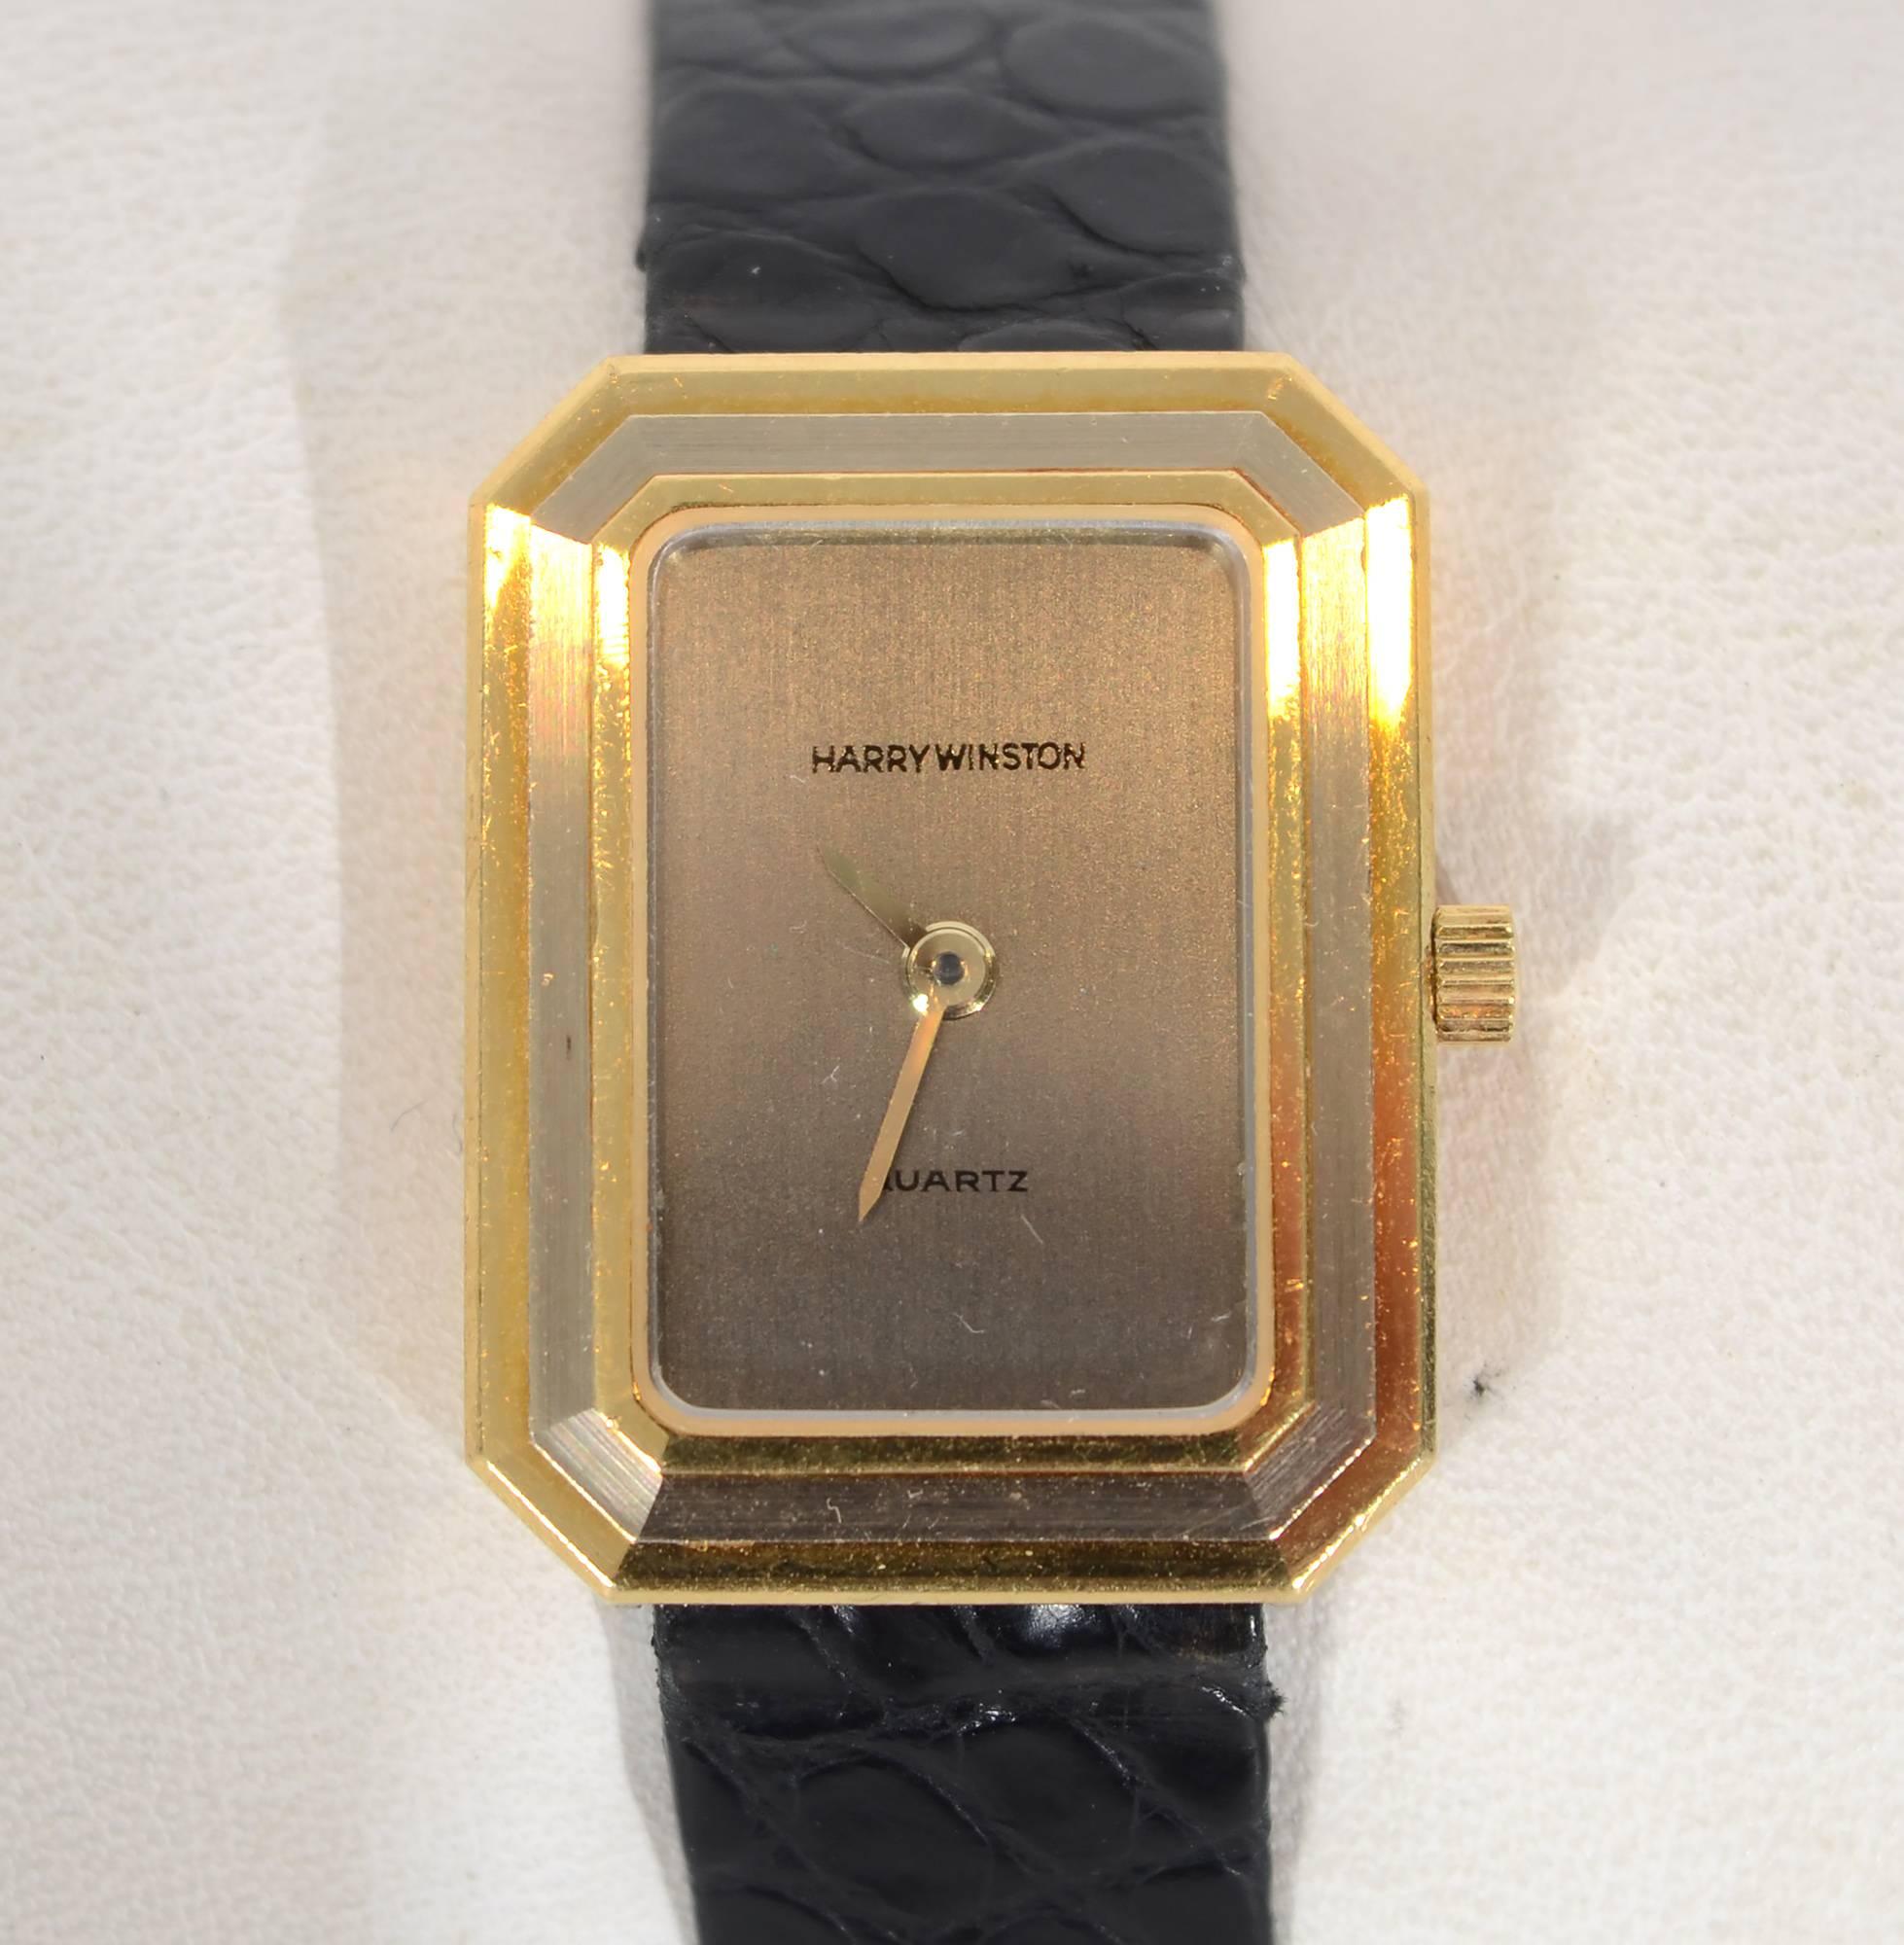 Harry Winston sporty tank wrist watch in yellow and white gold. Yellow gold outer and inner bands frame one of white gold. The face is silvertone with gold hands. The movement is quartz. The band is the original Winston strap with a buckle that